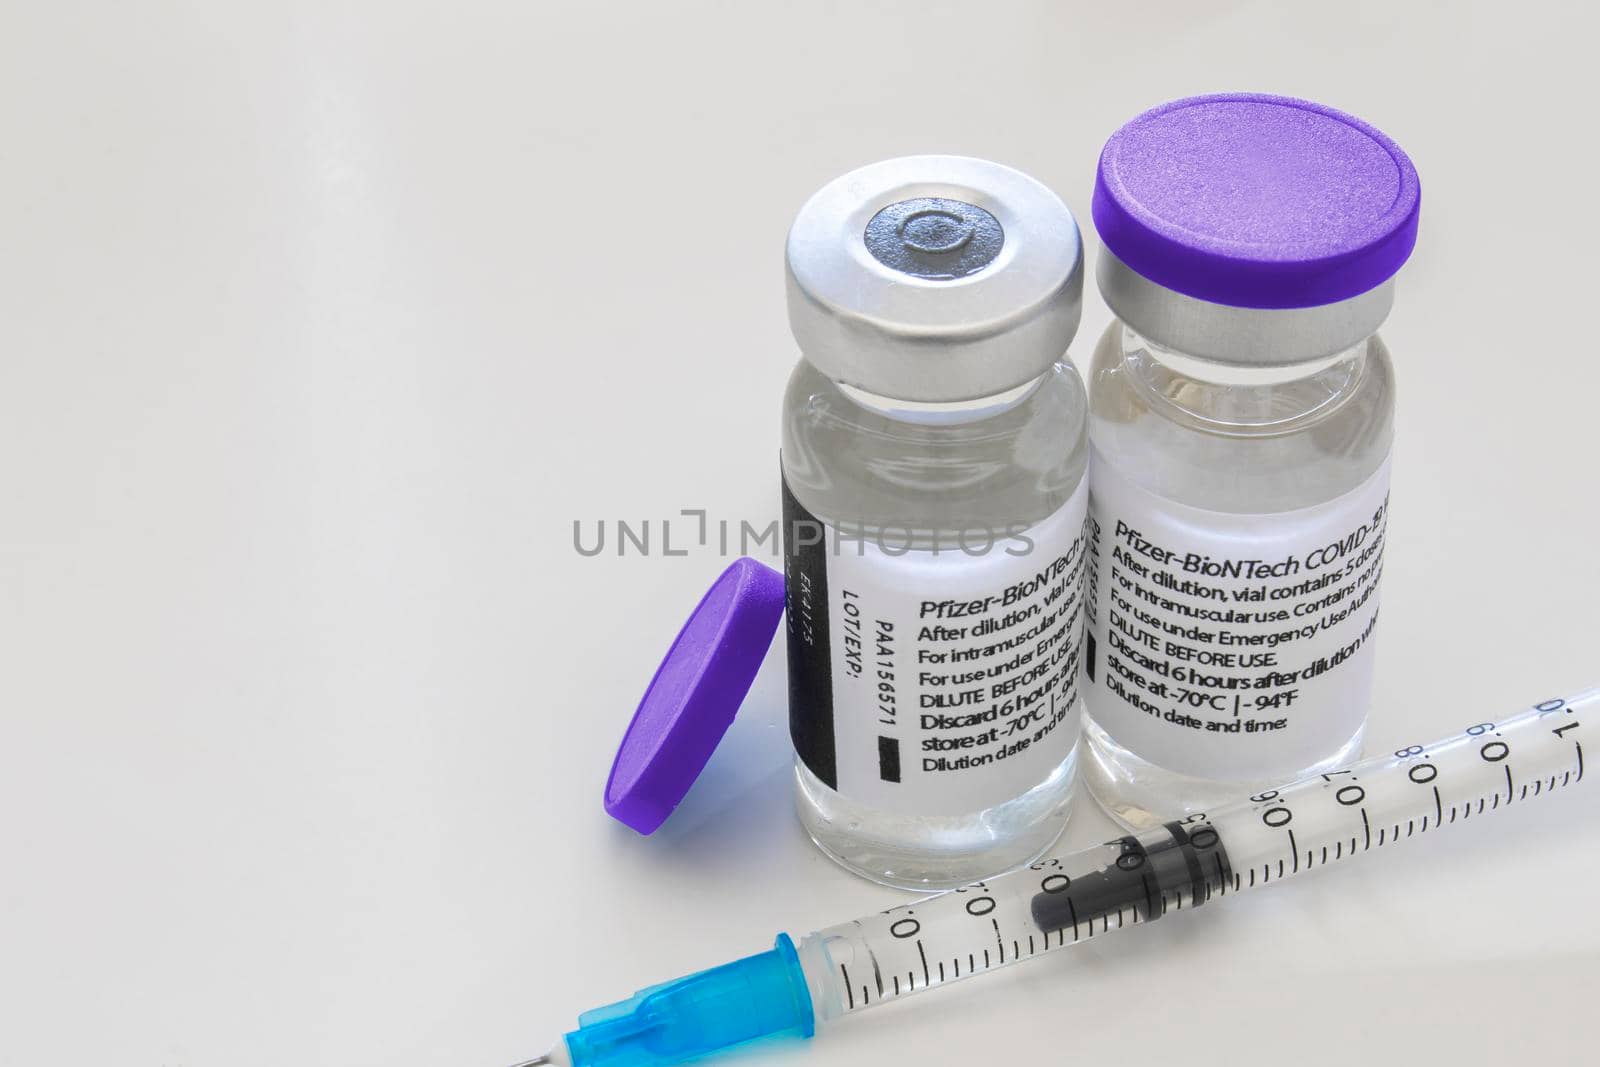 Calgary, Alberta, Canada. April 16, 2021. A couple of Pfizer Covid-19 vaccine vials bottles and an injection syringe on a clear table. by oasisamuel